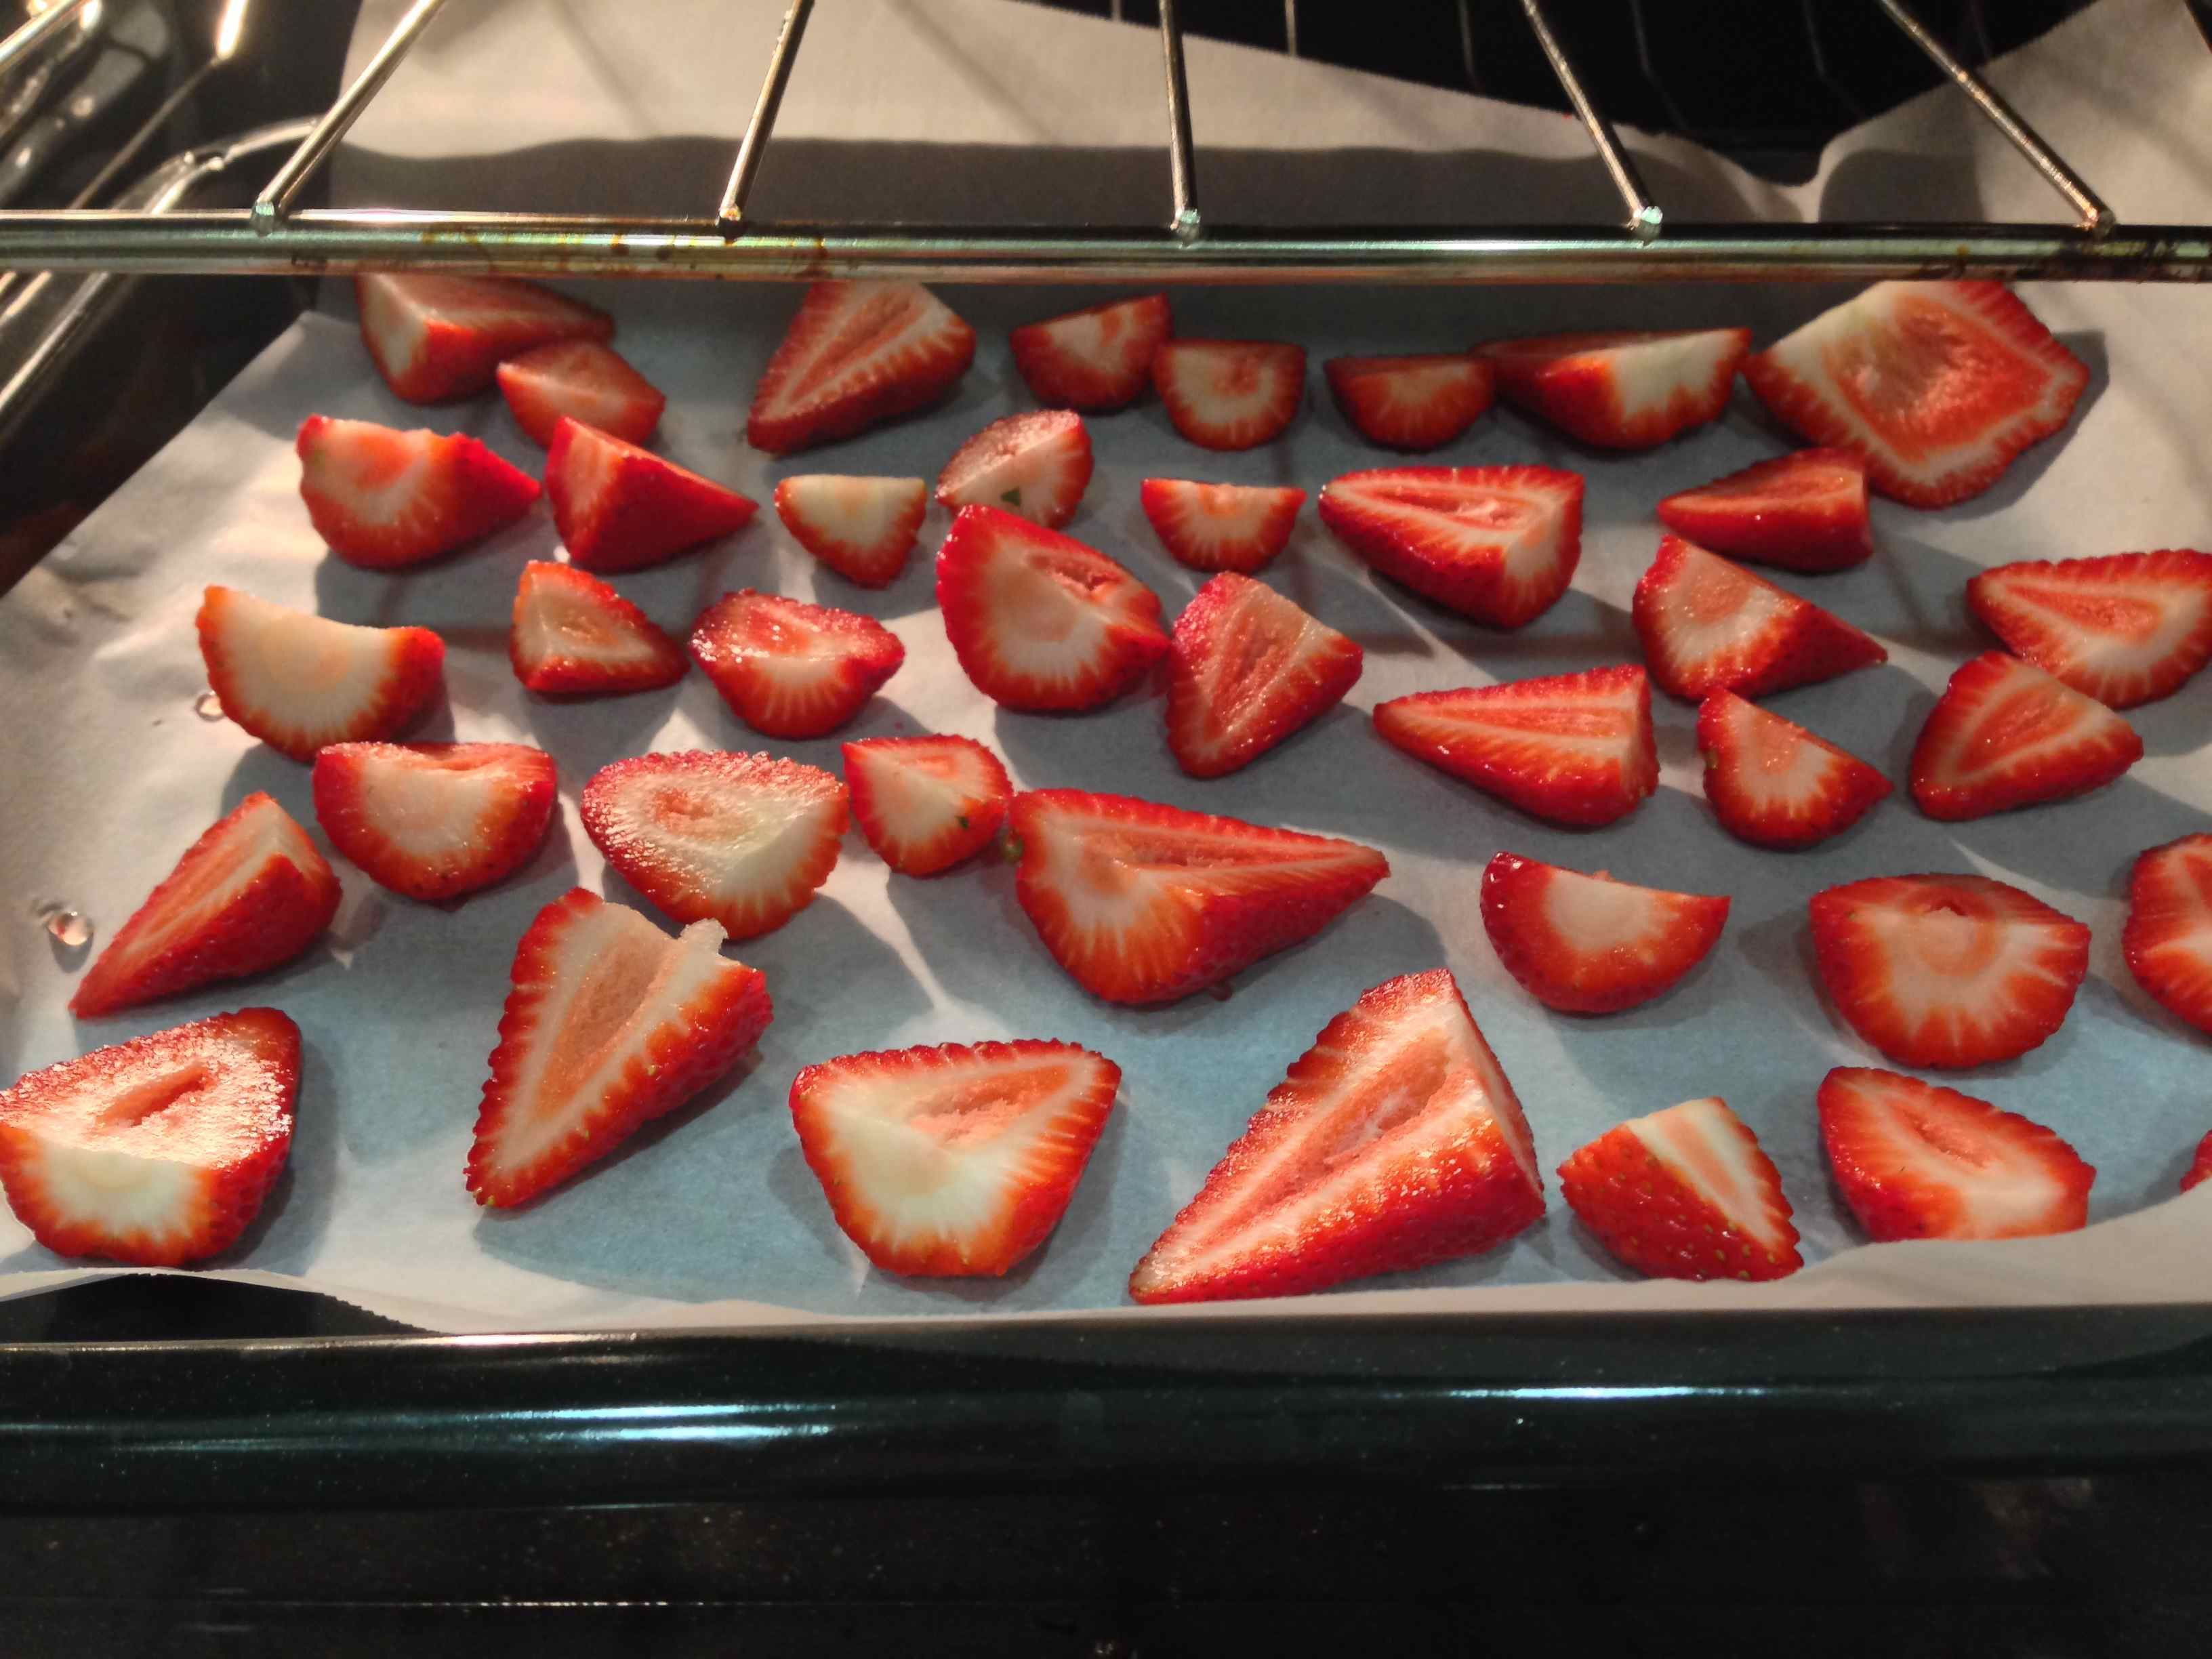 Strawberries dried in the oven. Tastes like candy but are healthy & natural.